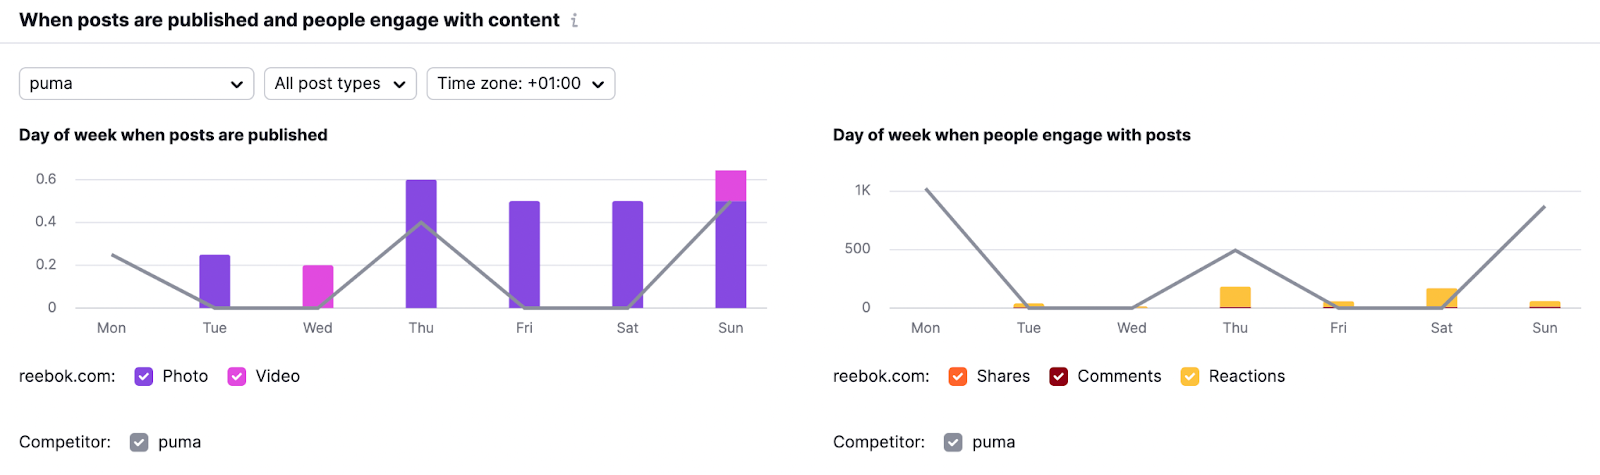 an example of graphs showing when the competitor publishes posts and when their audience engages with posts